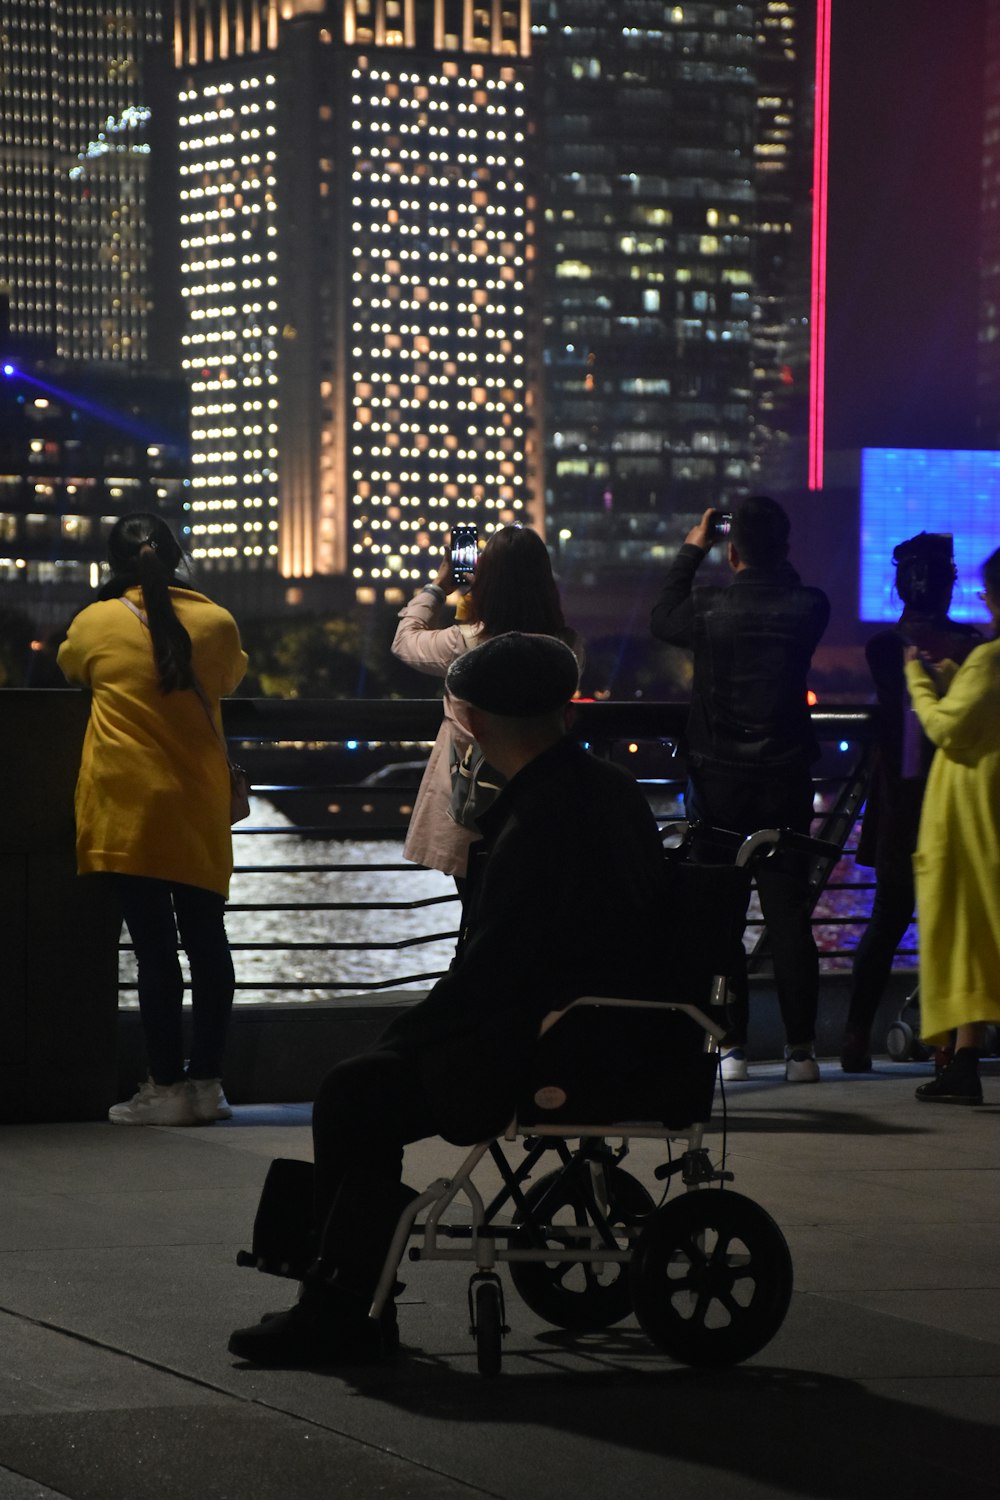 person riding wheelchair near people taking pictures of the city during night